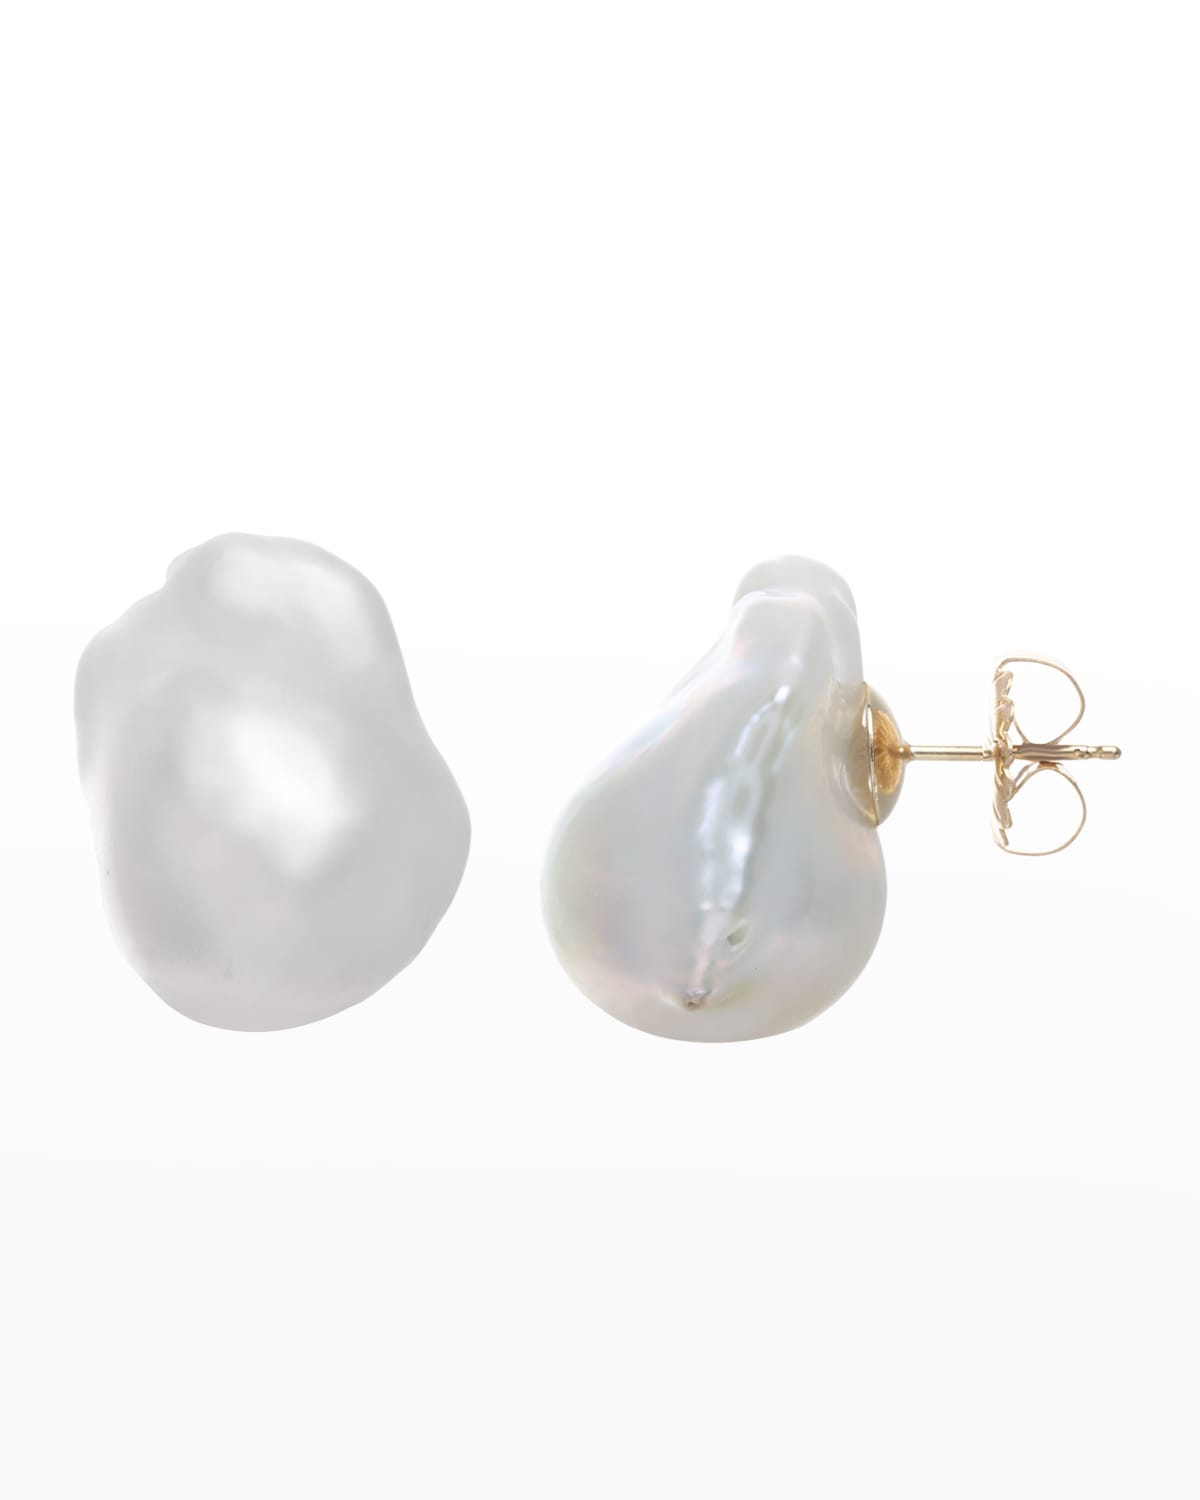 White Baroque Pearl Earrings in 14k Yellow Gold Posts